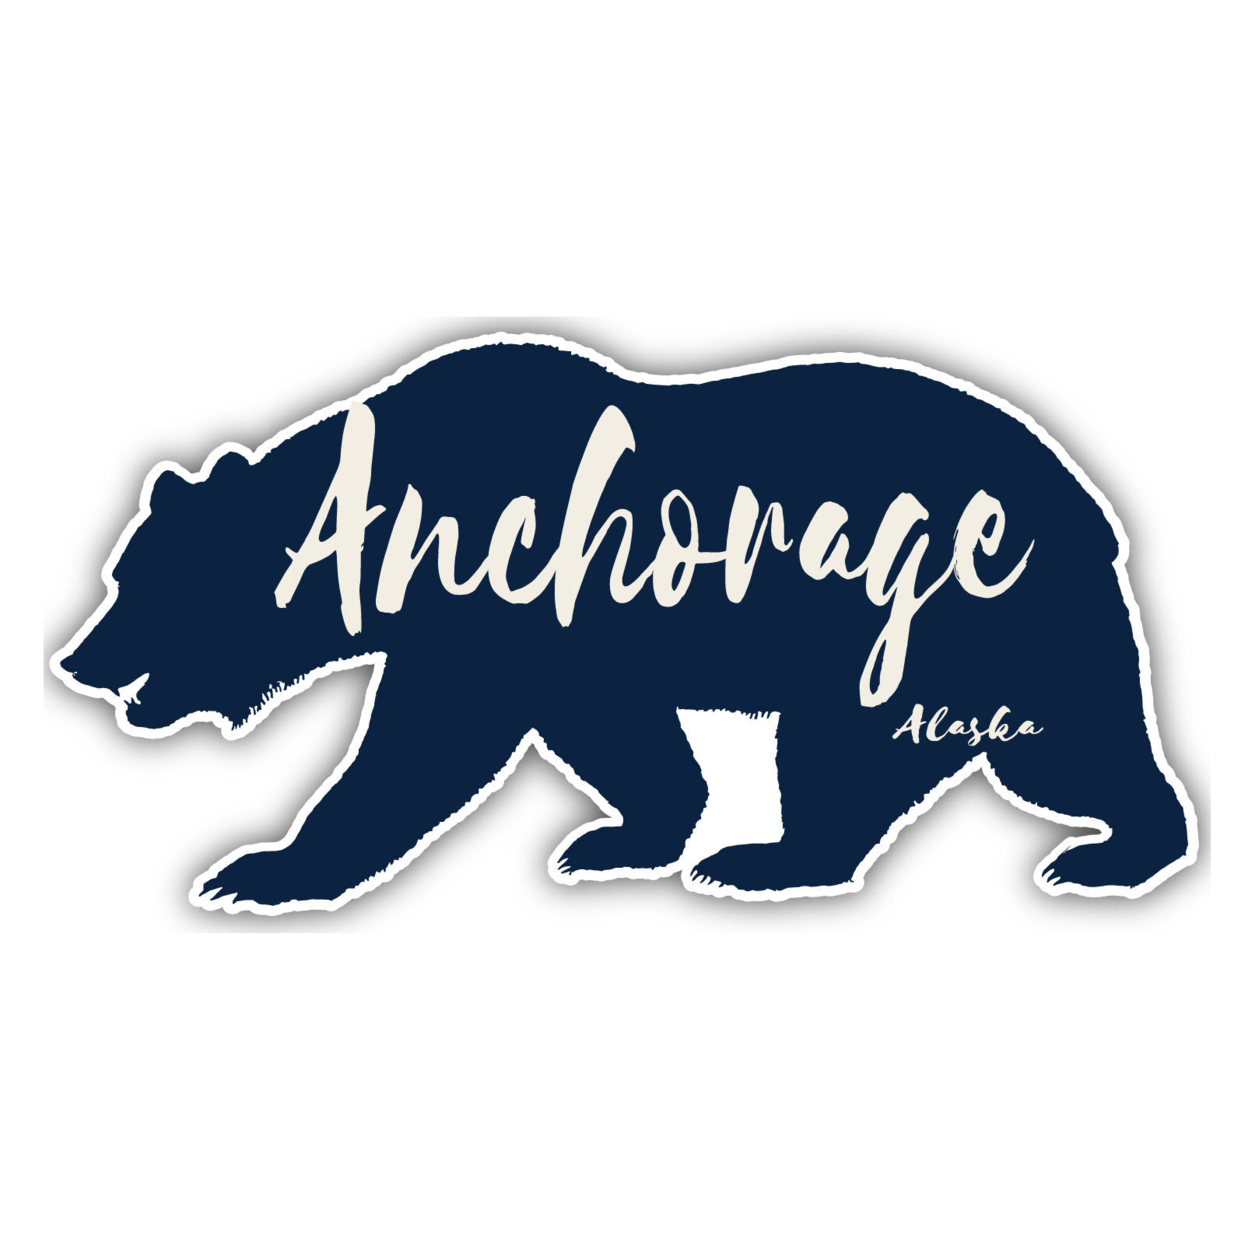 Anchorage Alaska Souvenir Decorative Stickers (Choose Theme And Size) - 4-Pack, 6-Inch, Great Outdoors